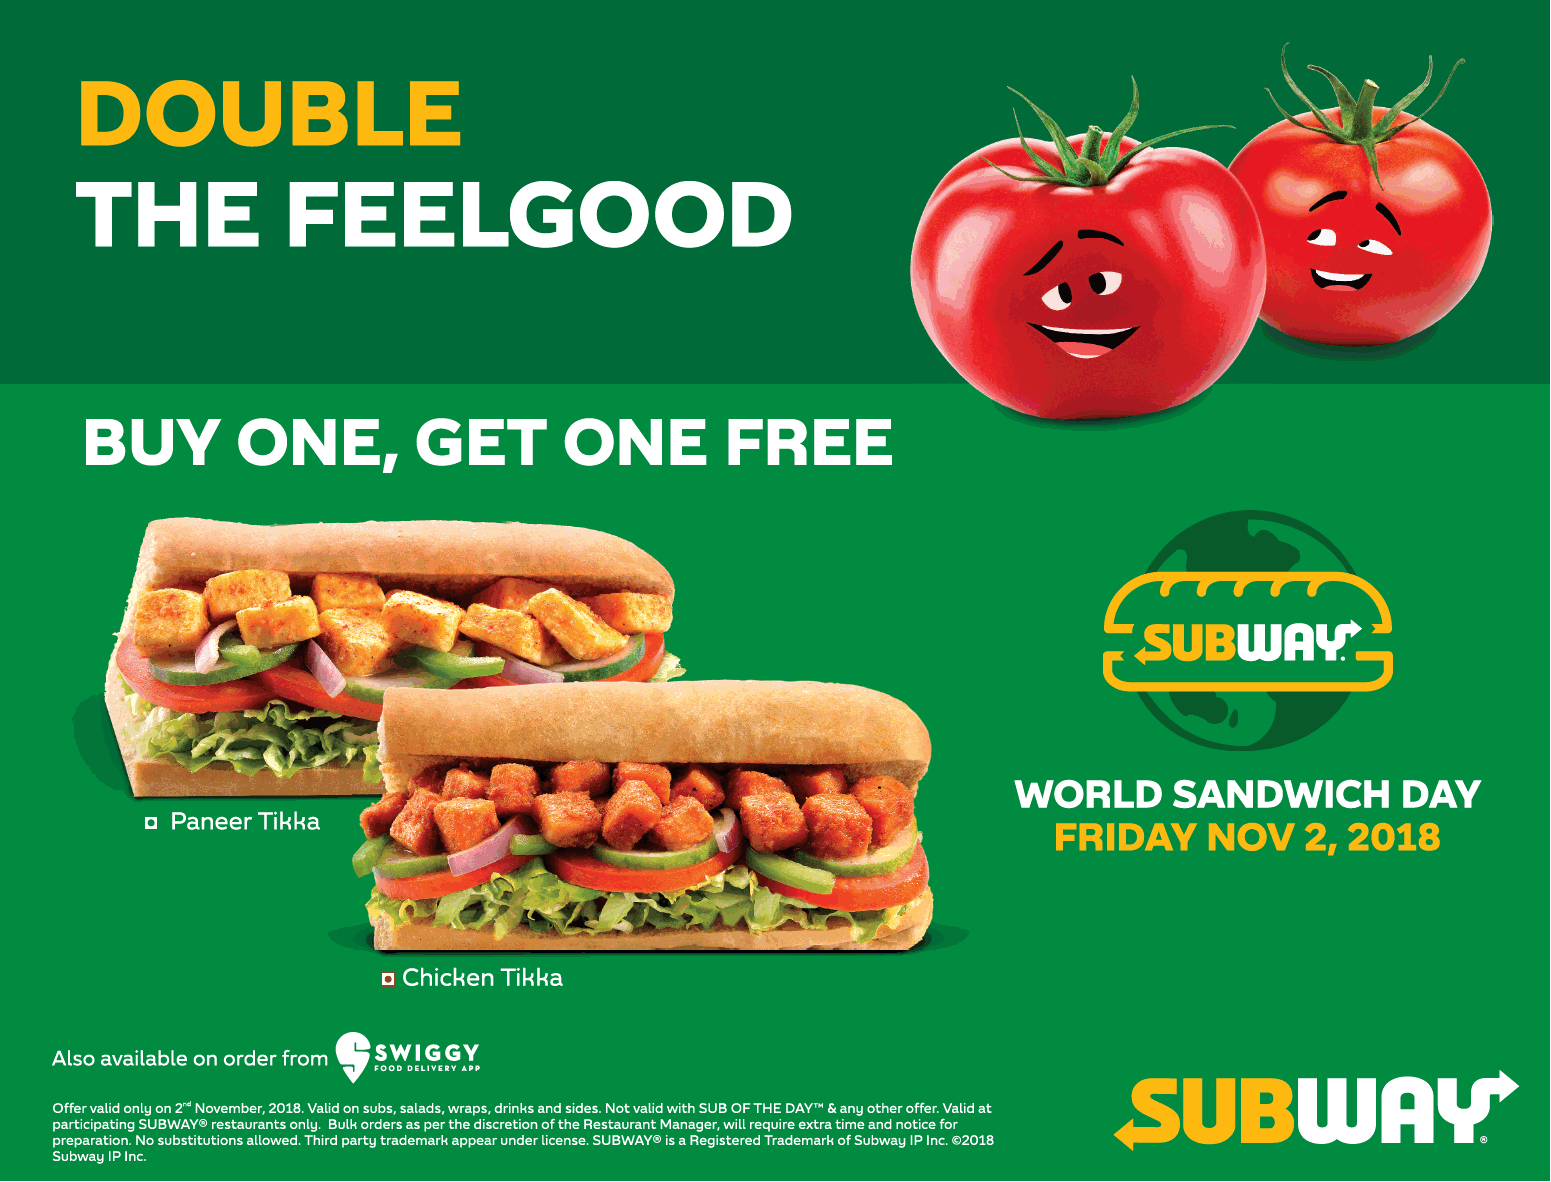 Subway Double The Feelgood Buy One, Get One Free on World Sandwich Day